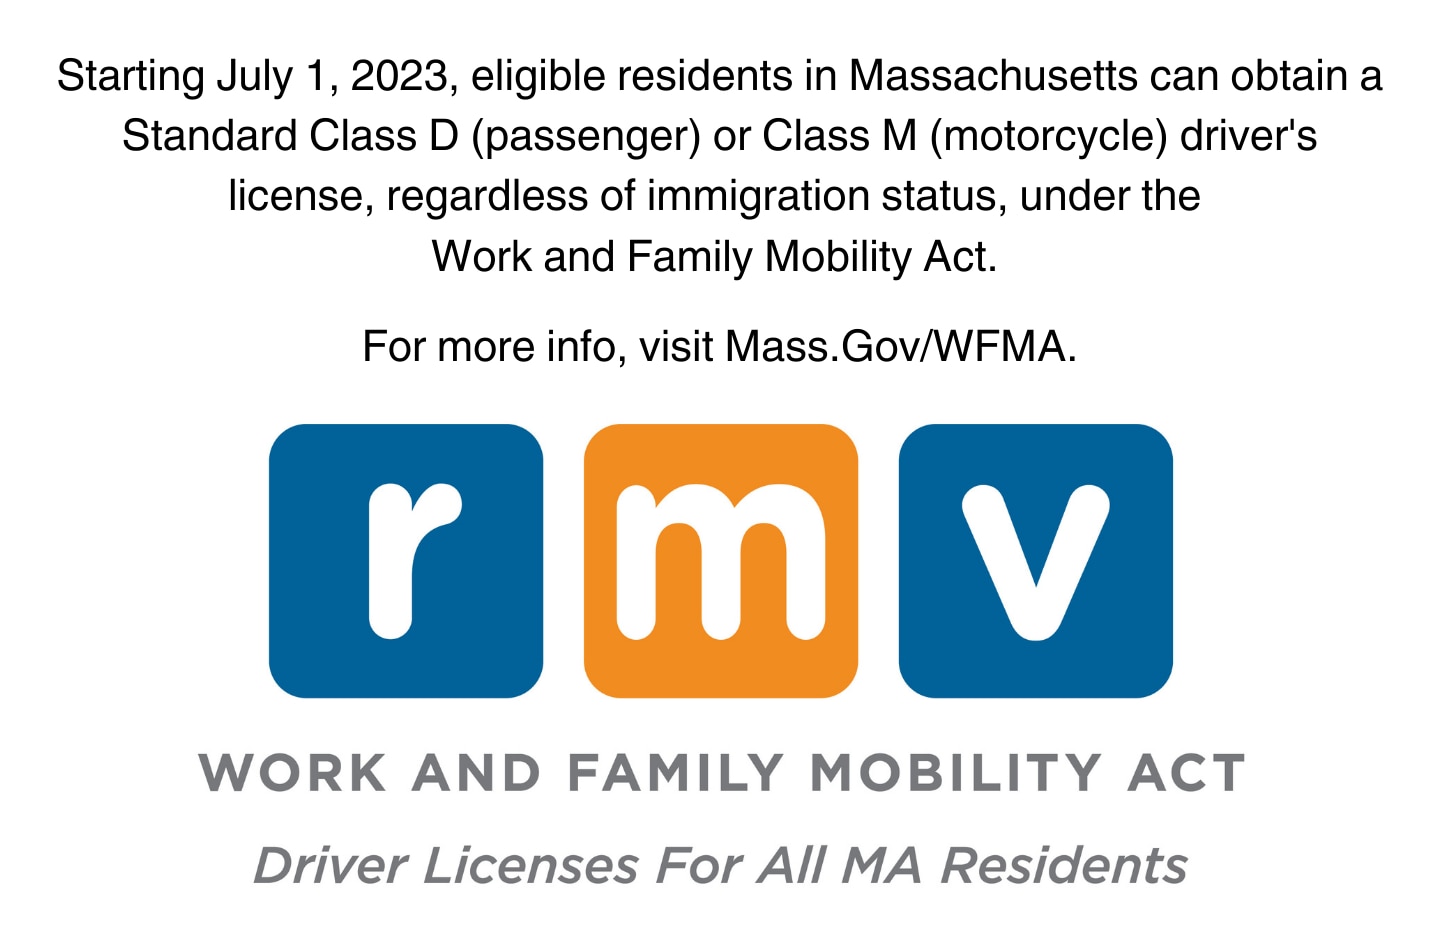 Starting July 1, 2023 eligible Massachusetts residents can obtain a Standard Class D (passenger) or Class M (motorcycle) driver's license, regardless of immigration status, under the Work and Family Mobility Act. For more information and to start your application, visit Mass.Gov/WFMA. 